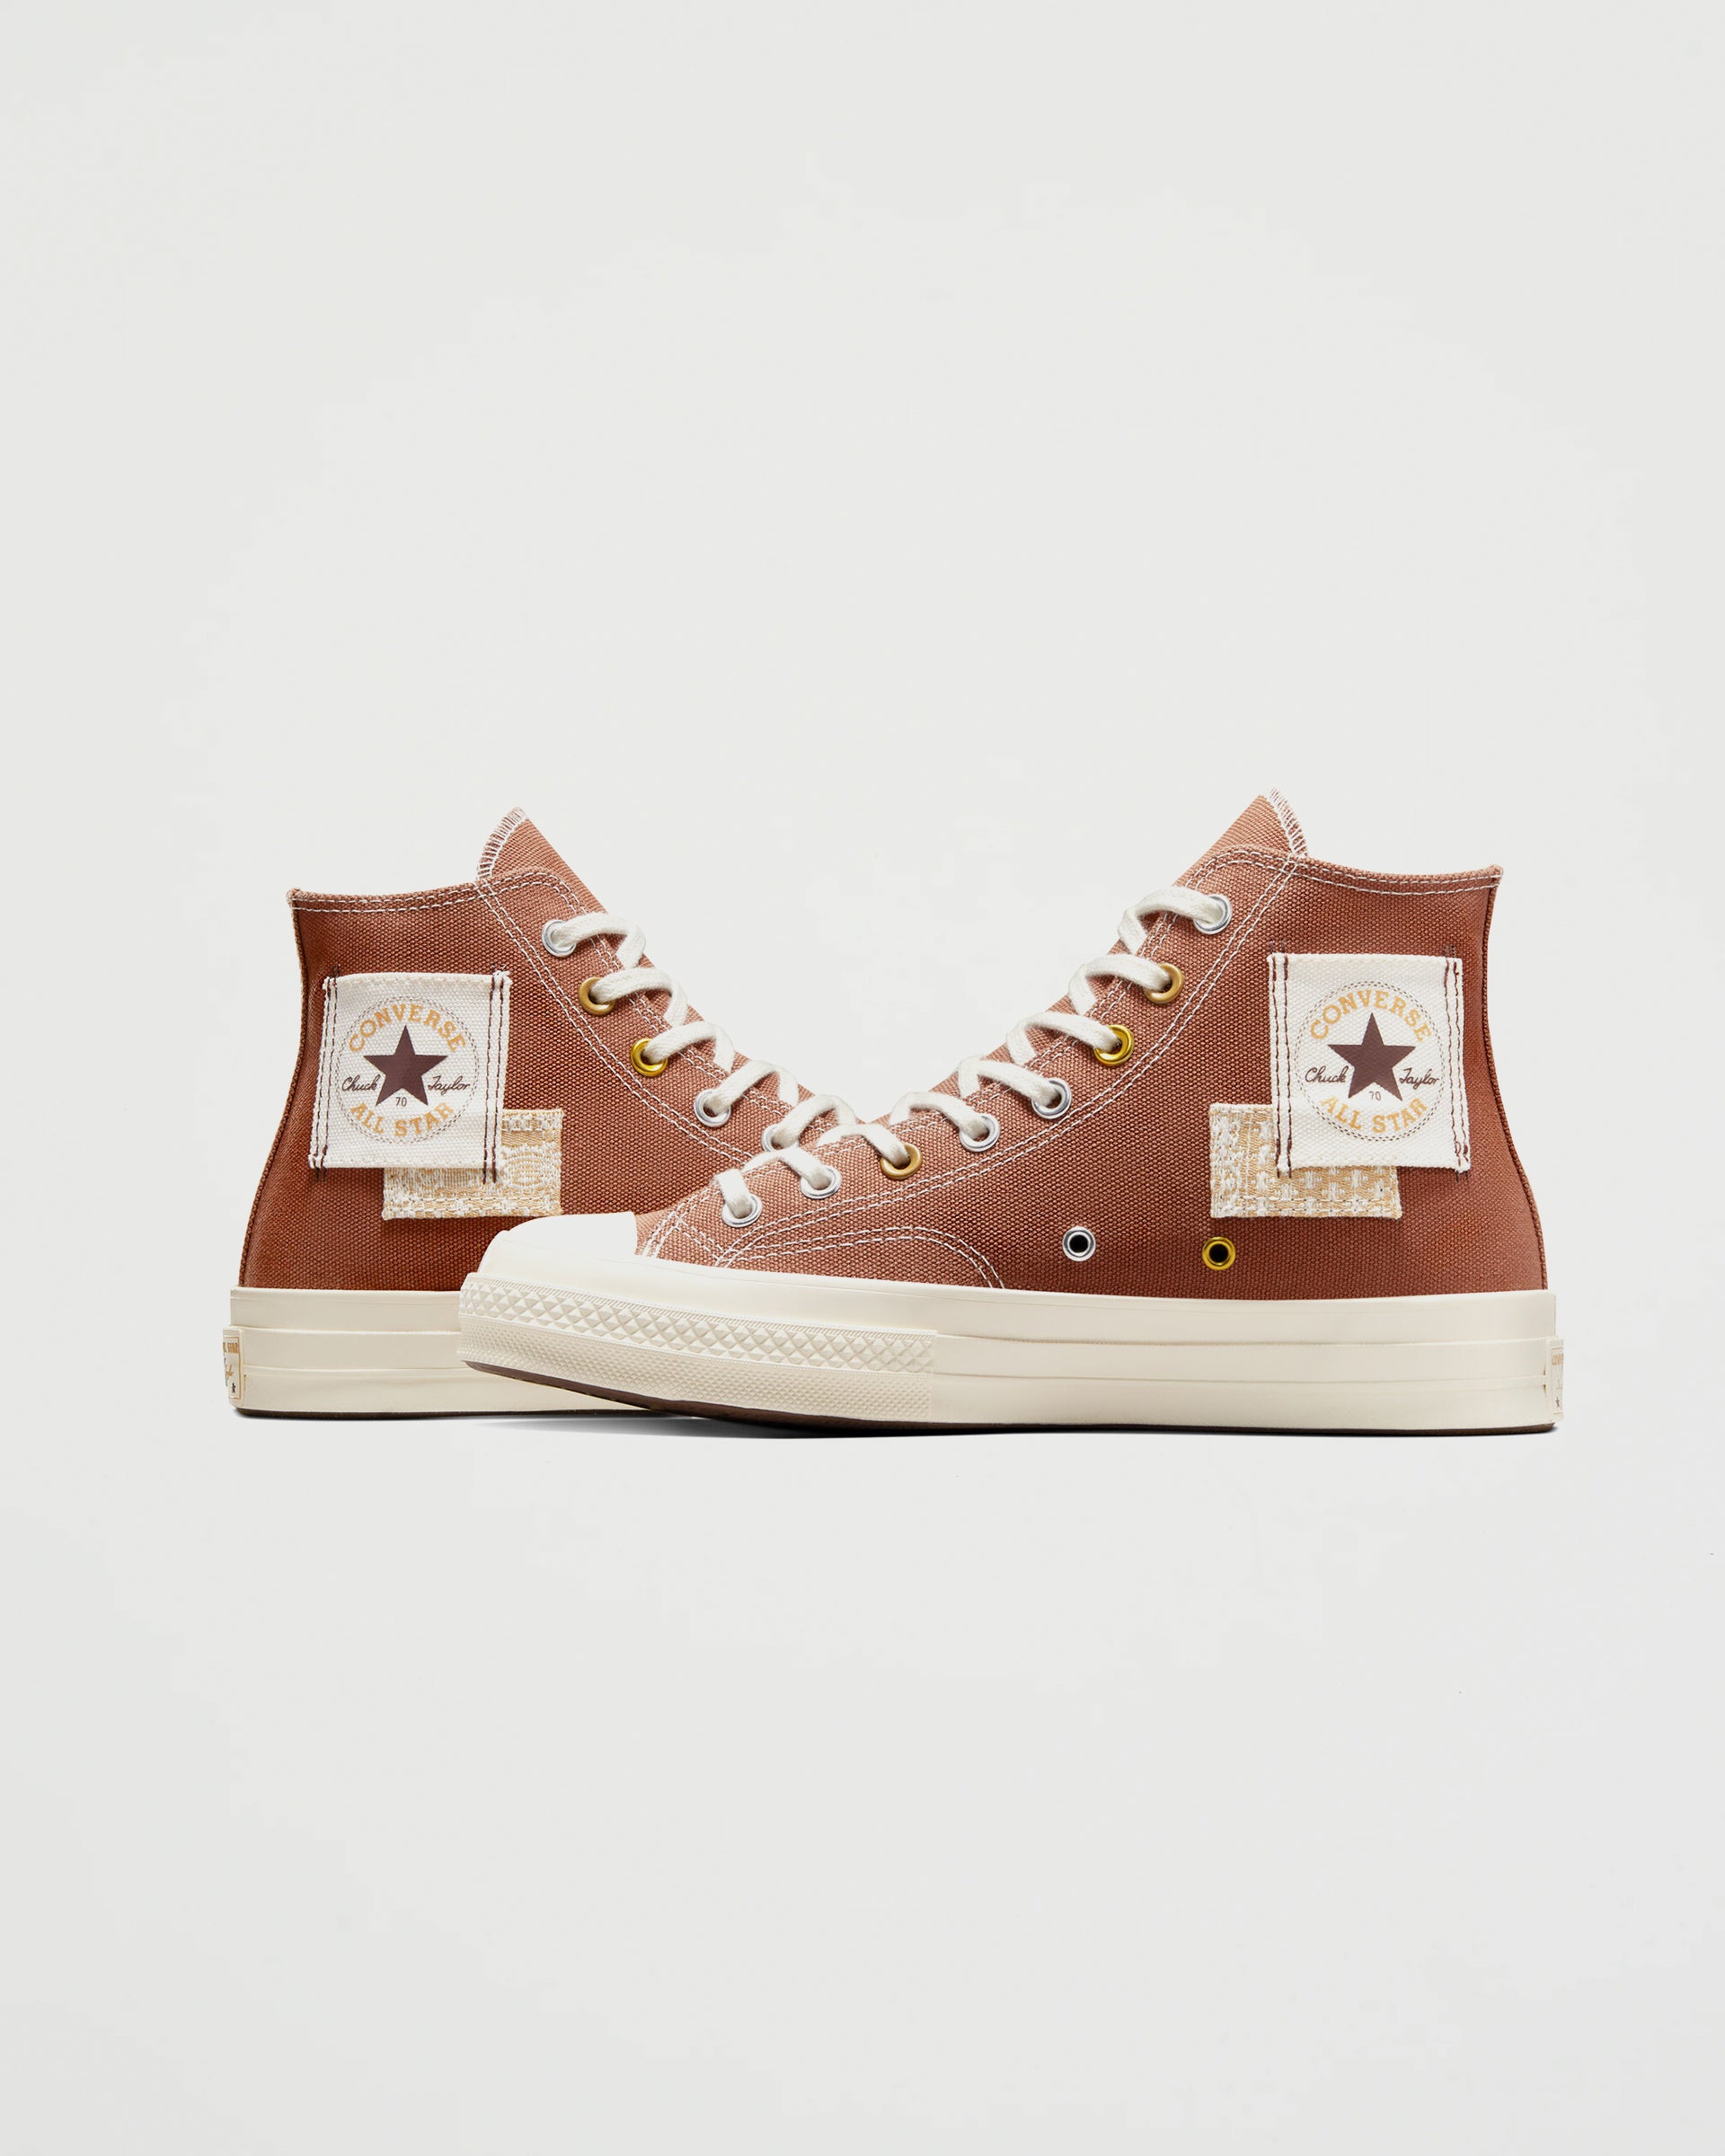 Converse Chuck 70 Hi Patchwork Tawny Owl Shoes Sneakers Unisex